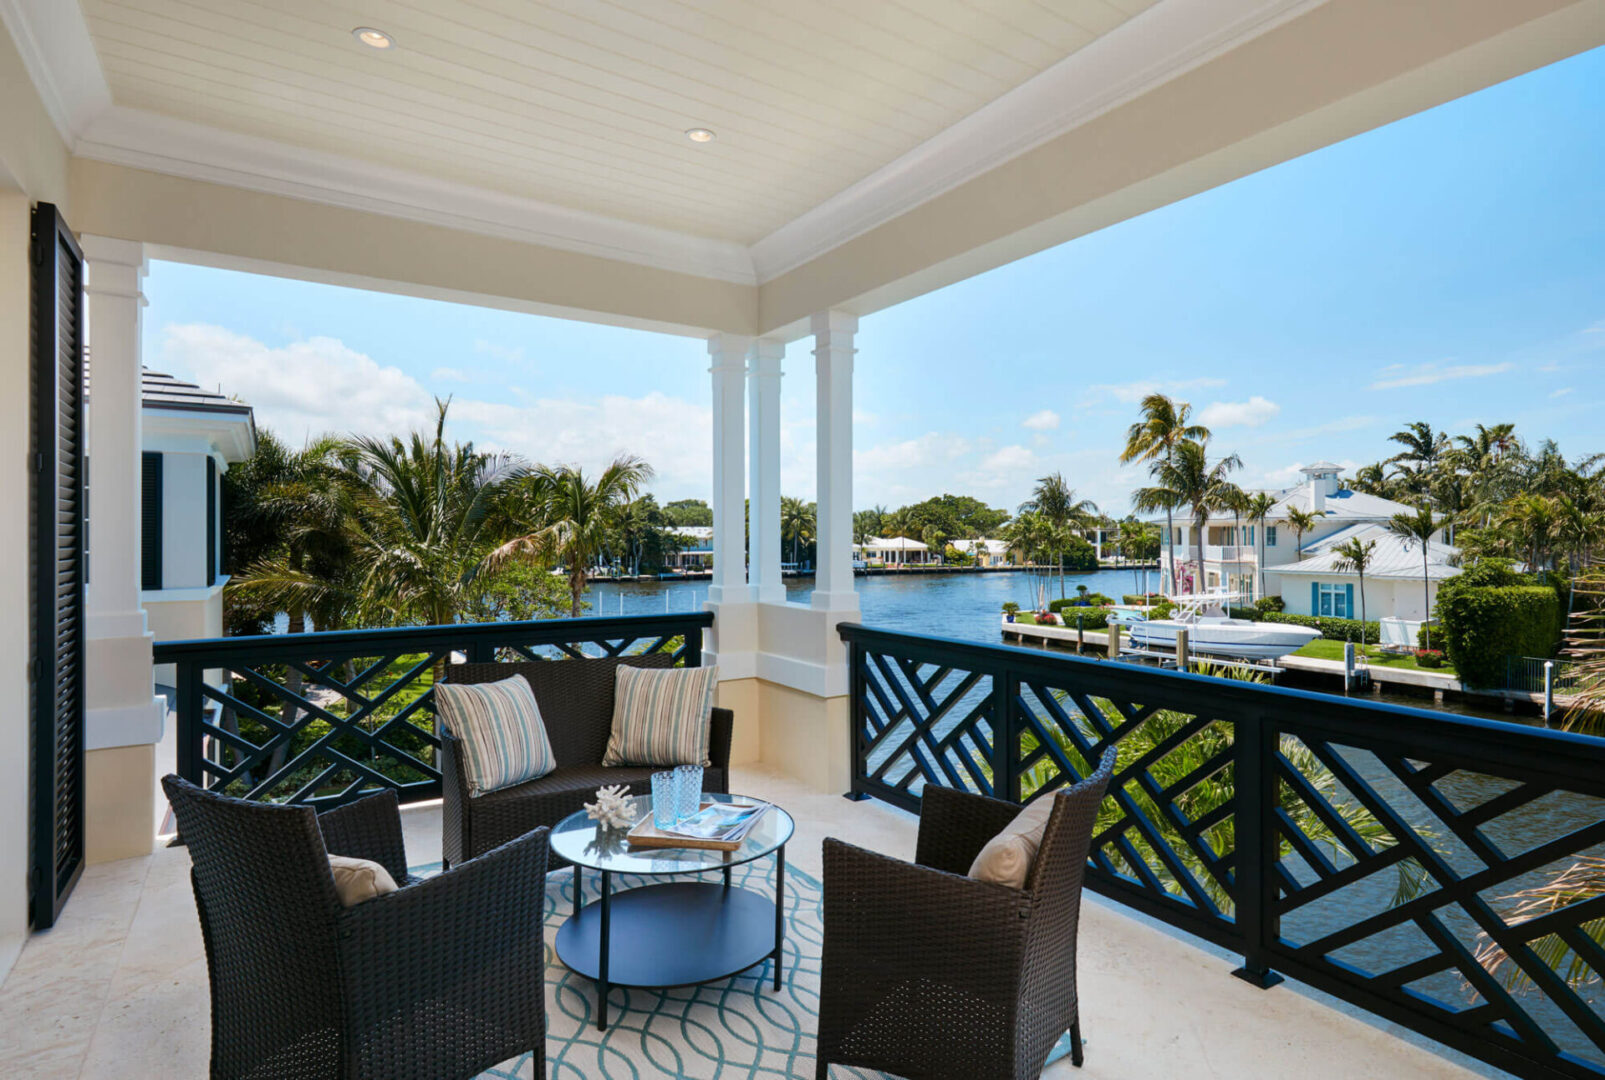 A balcony with chairs and tables overlooking the water.